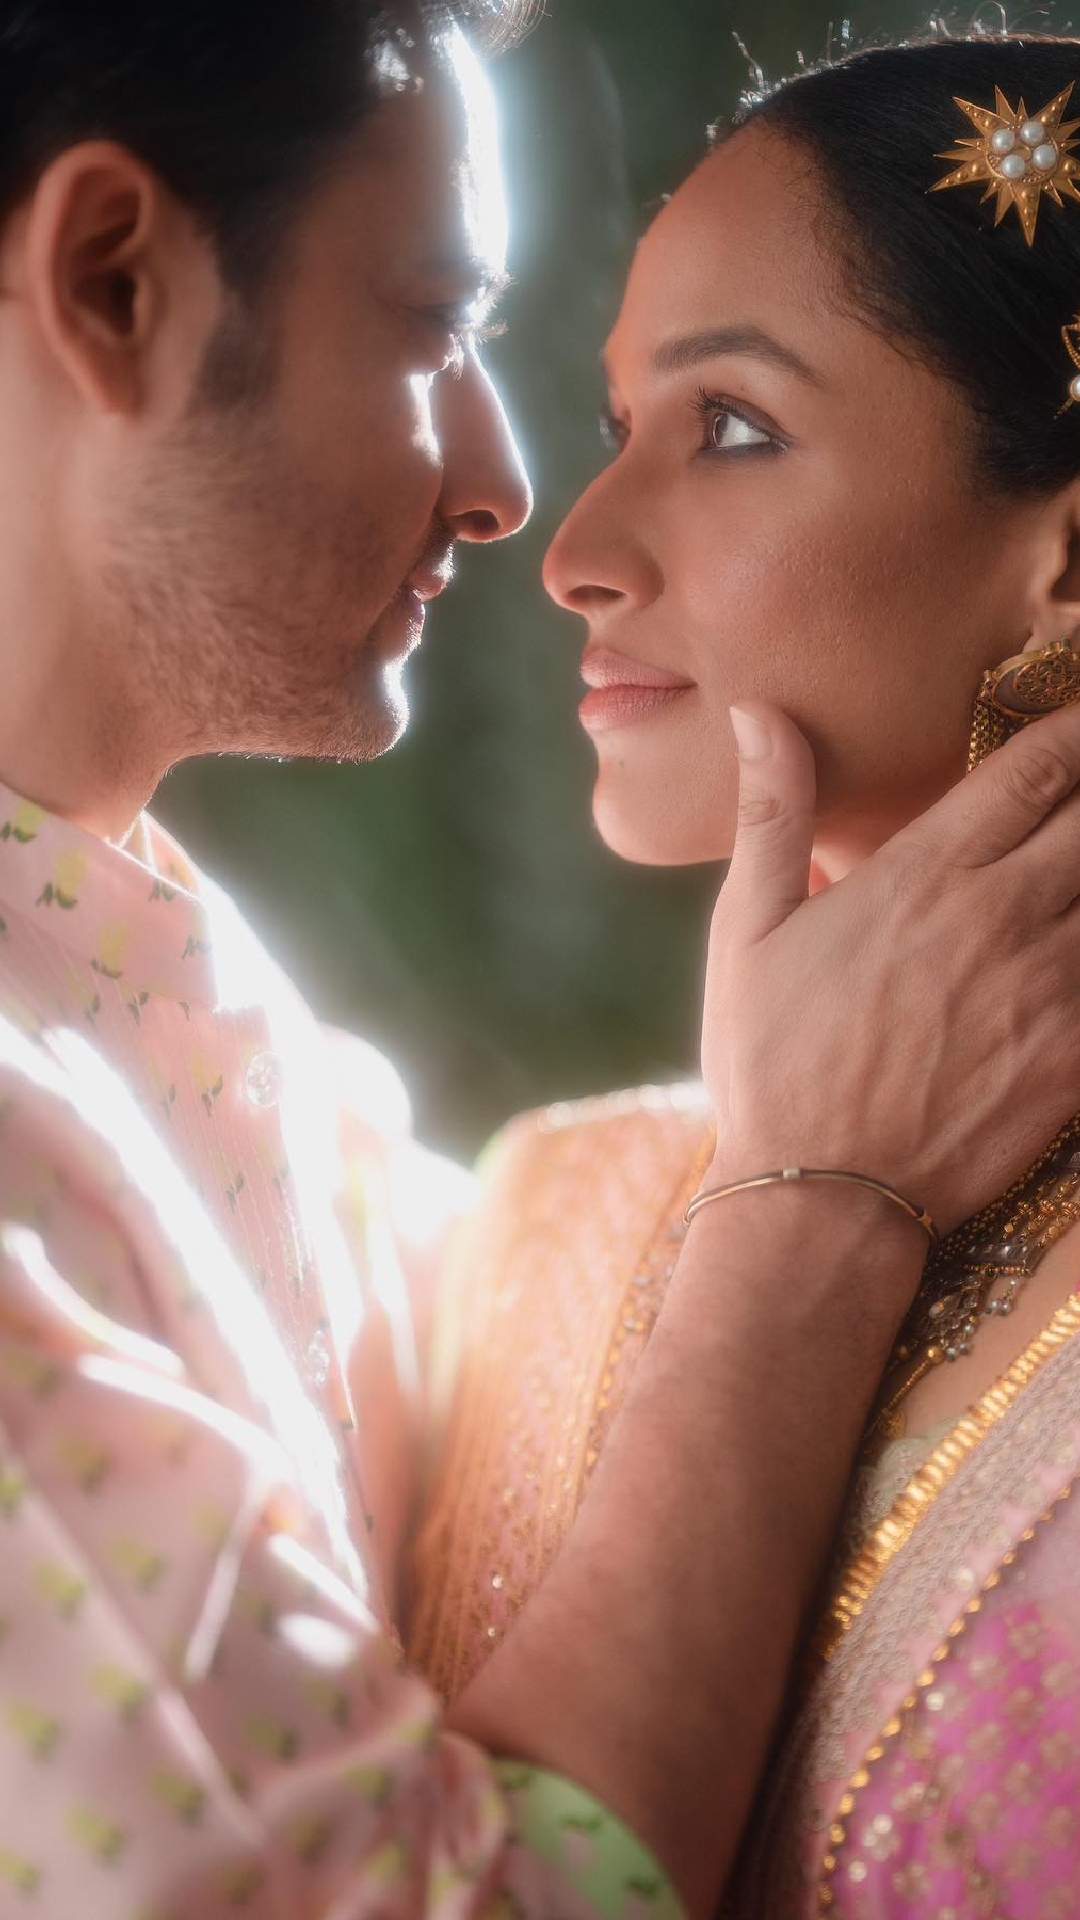 Masaba Gupta dropped first pictures from her intimate wedding with Satyadeep Misra and broke the internet.